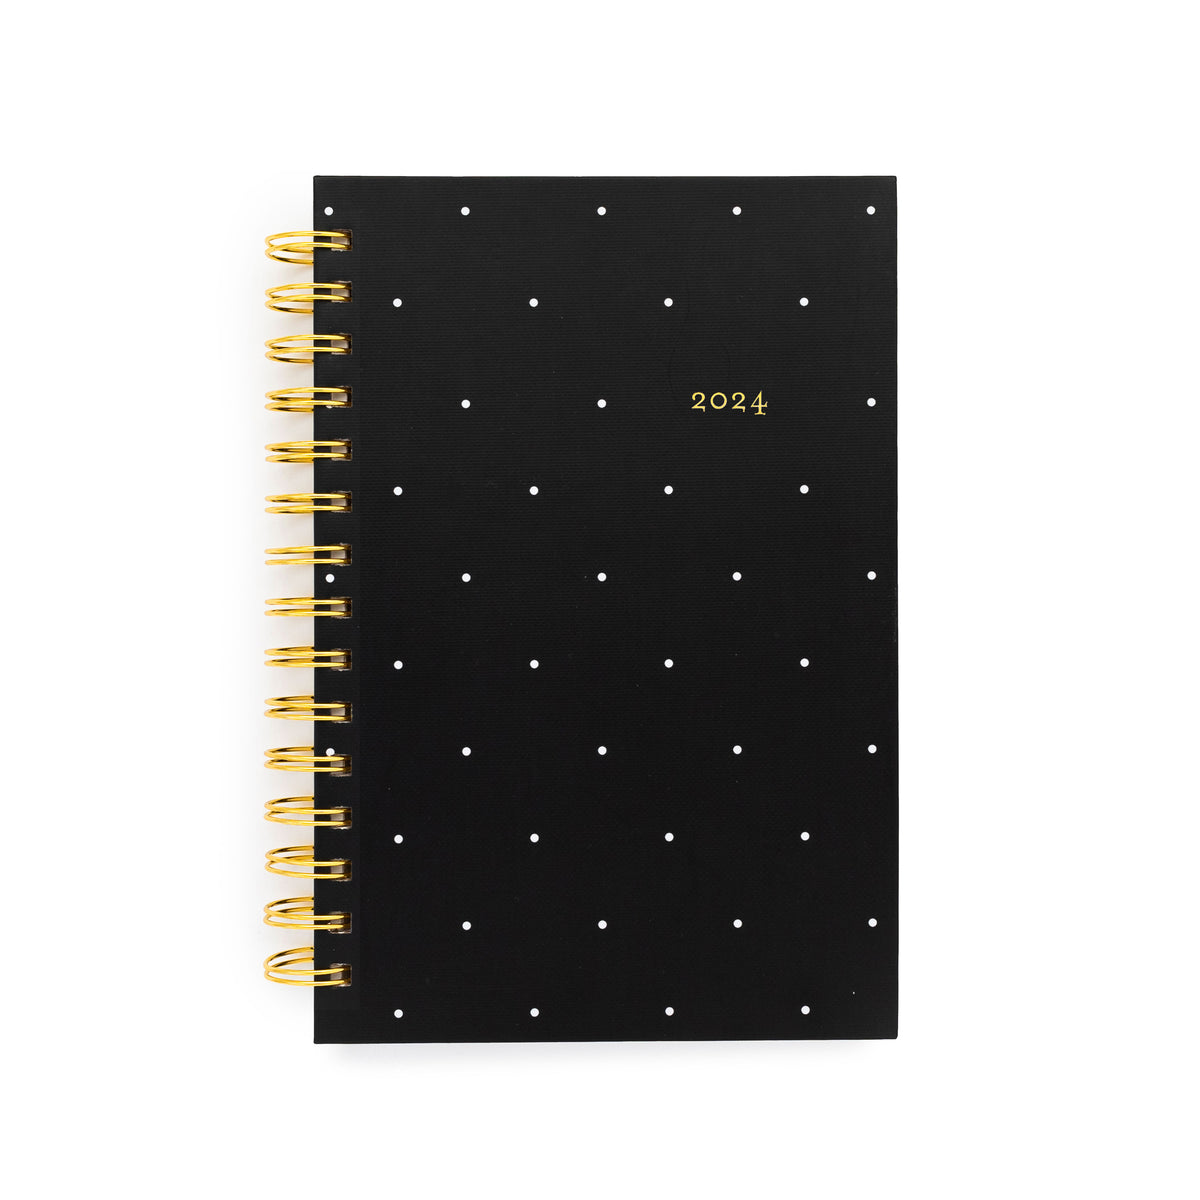 2024 black swiss dot small spiral planner cover